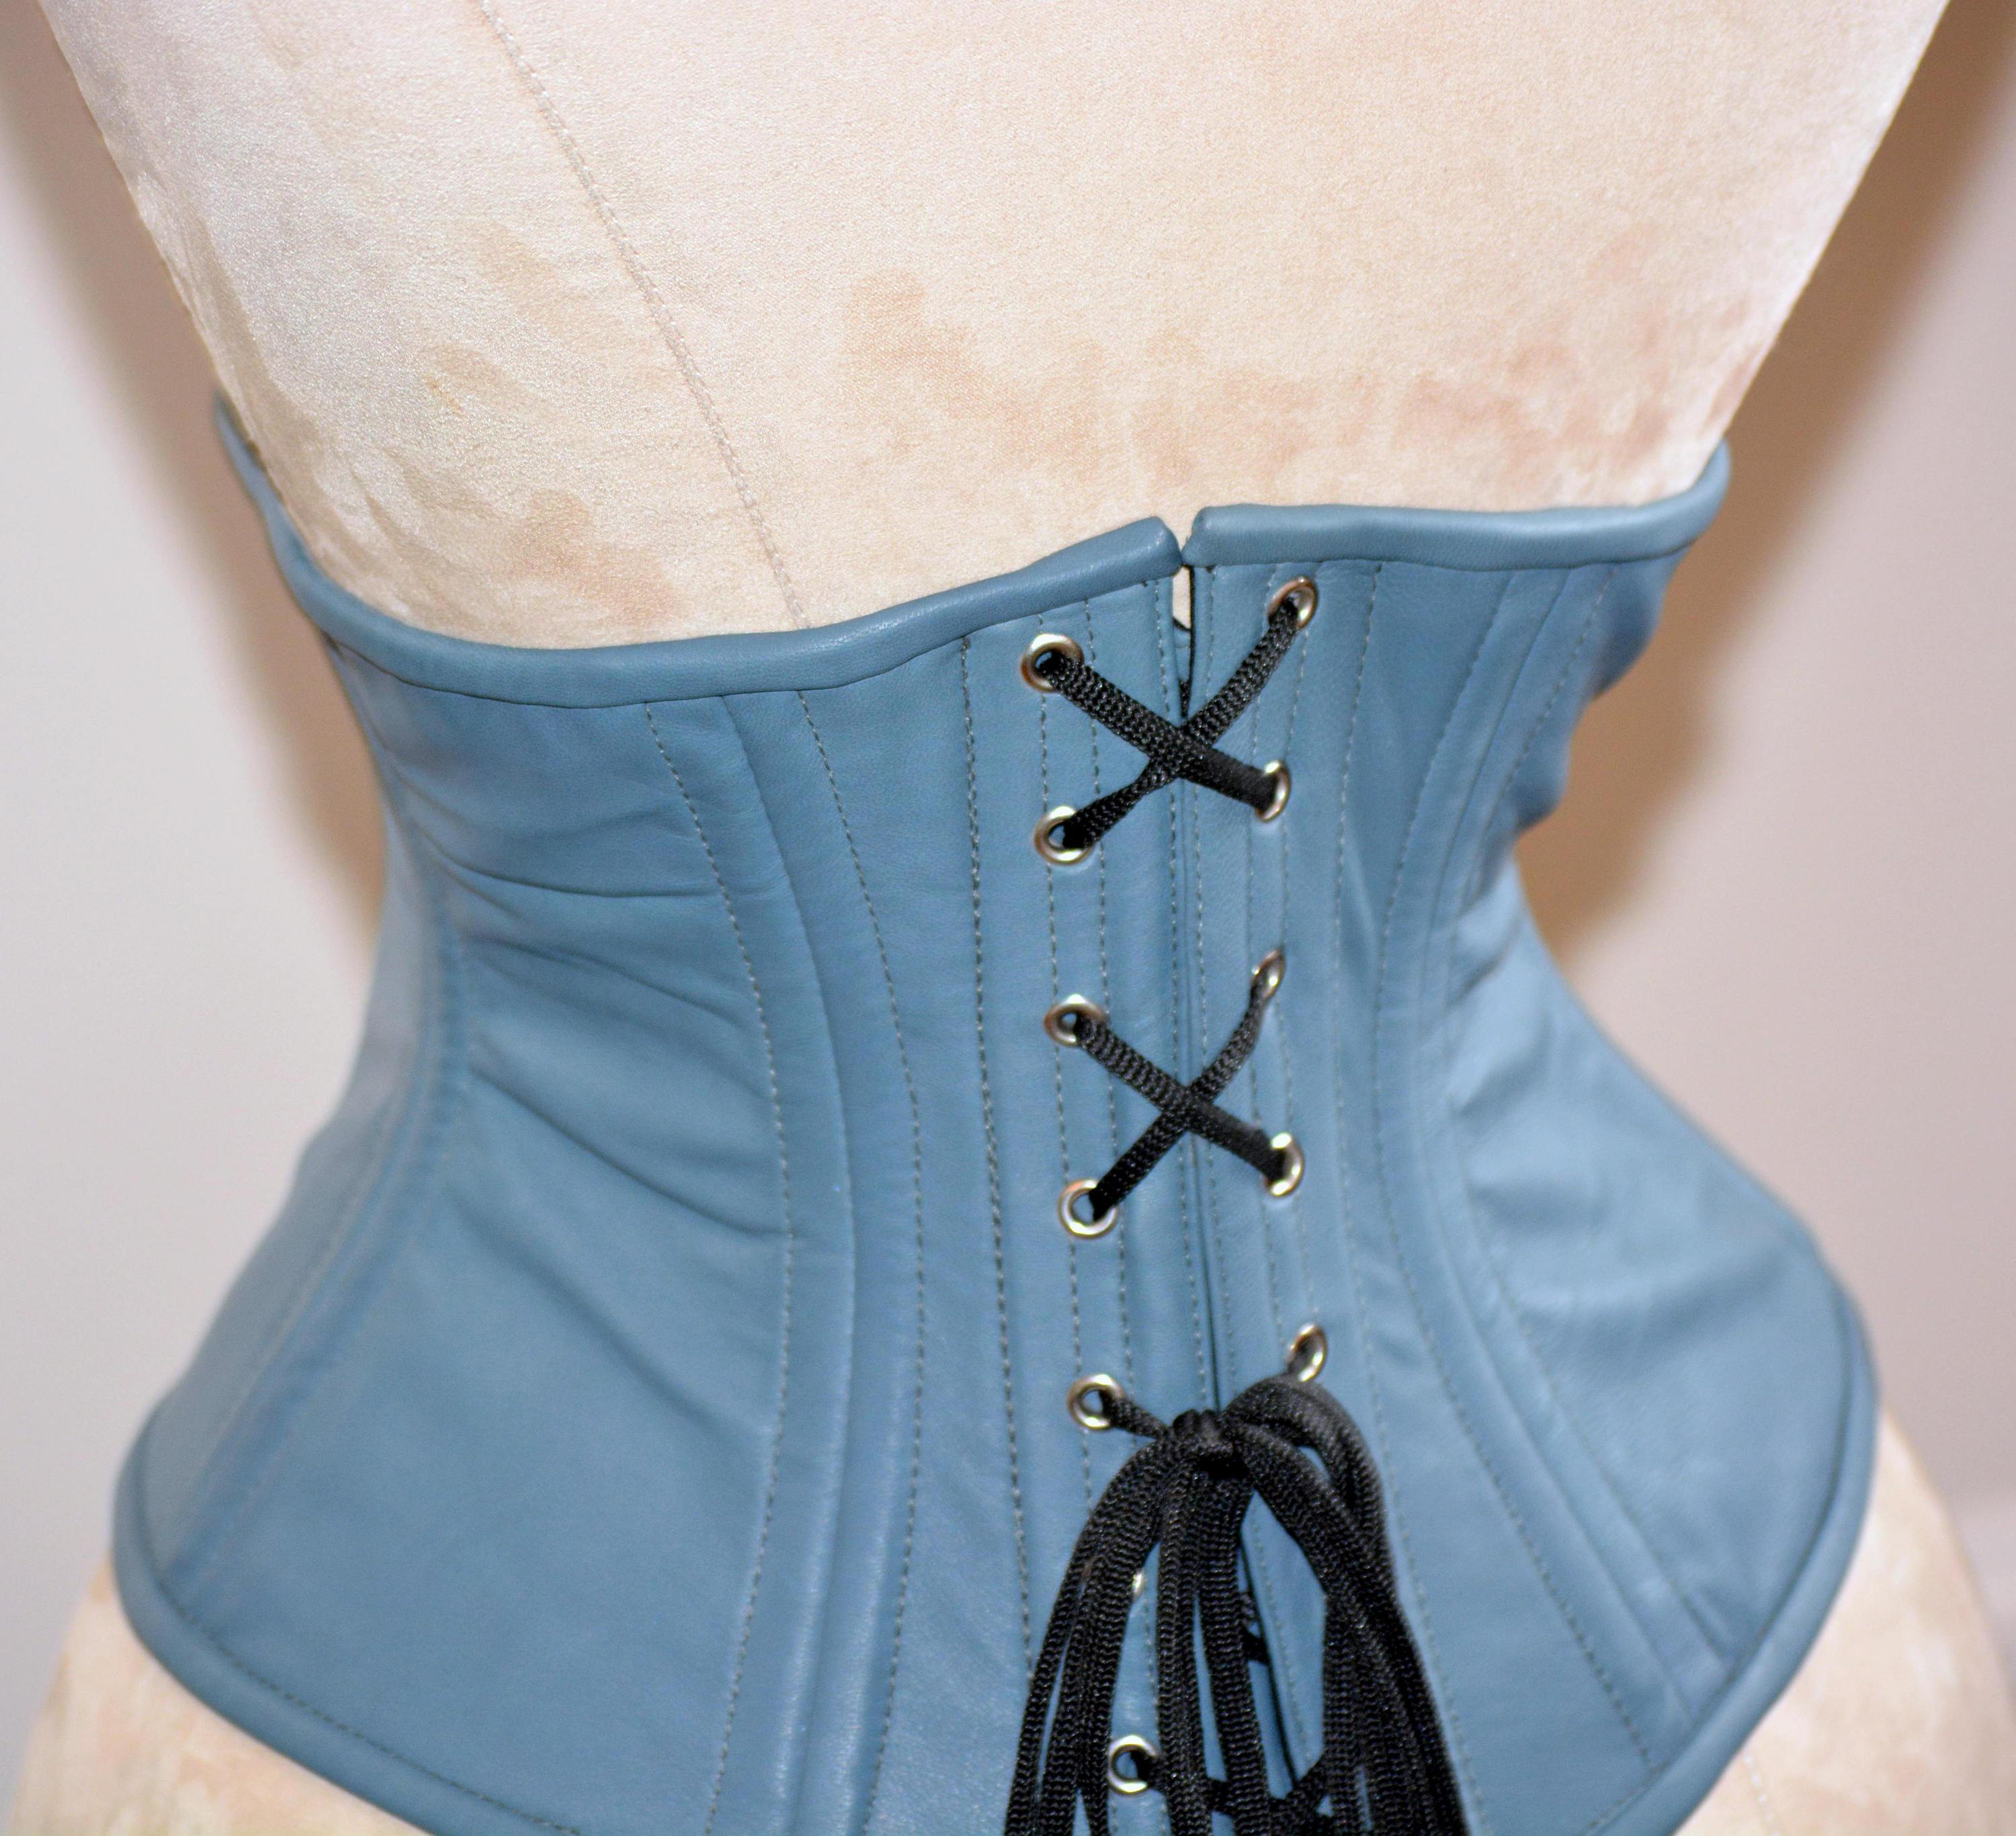 Corsettery USA - authentic steel-boned corsets from magazines